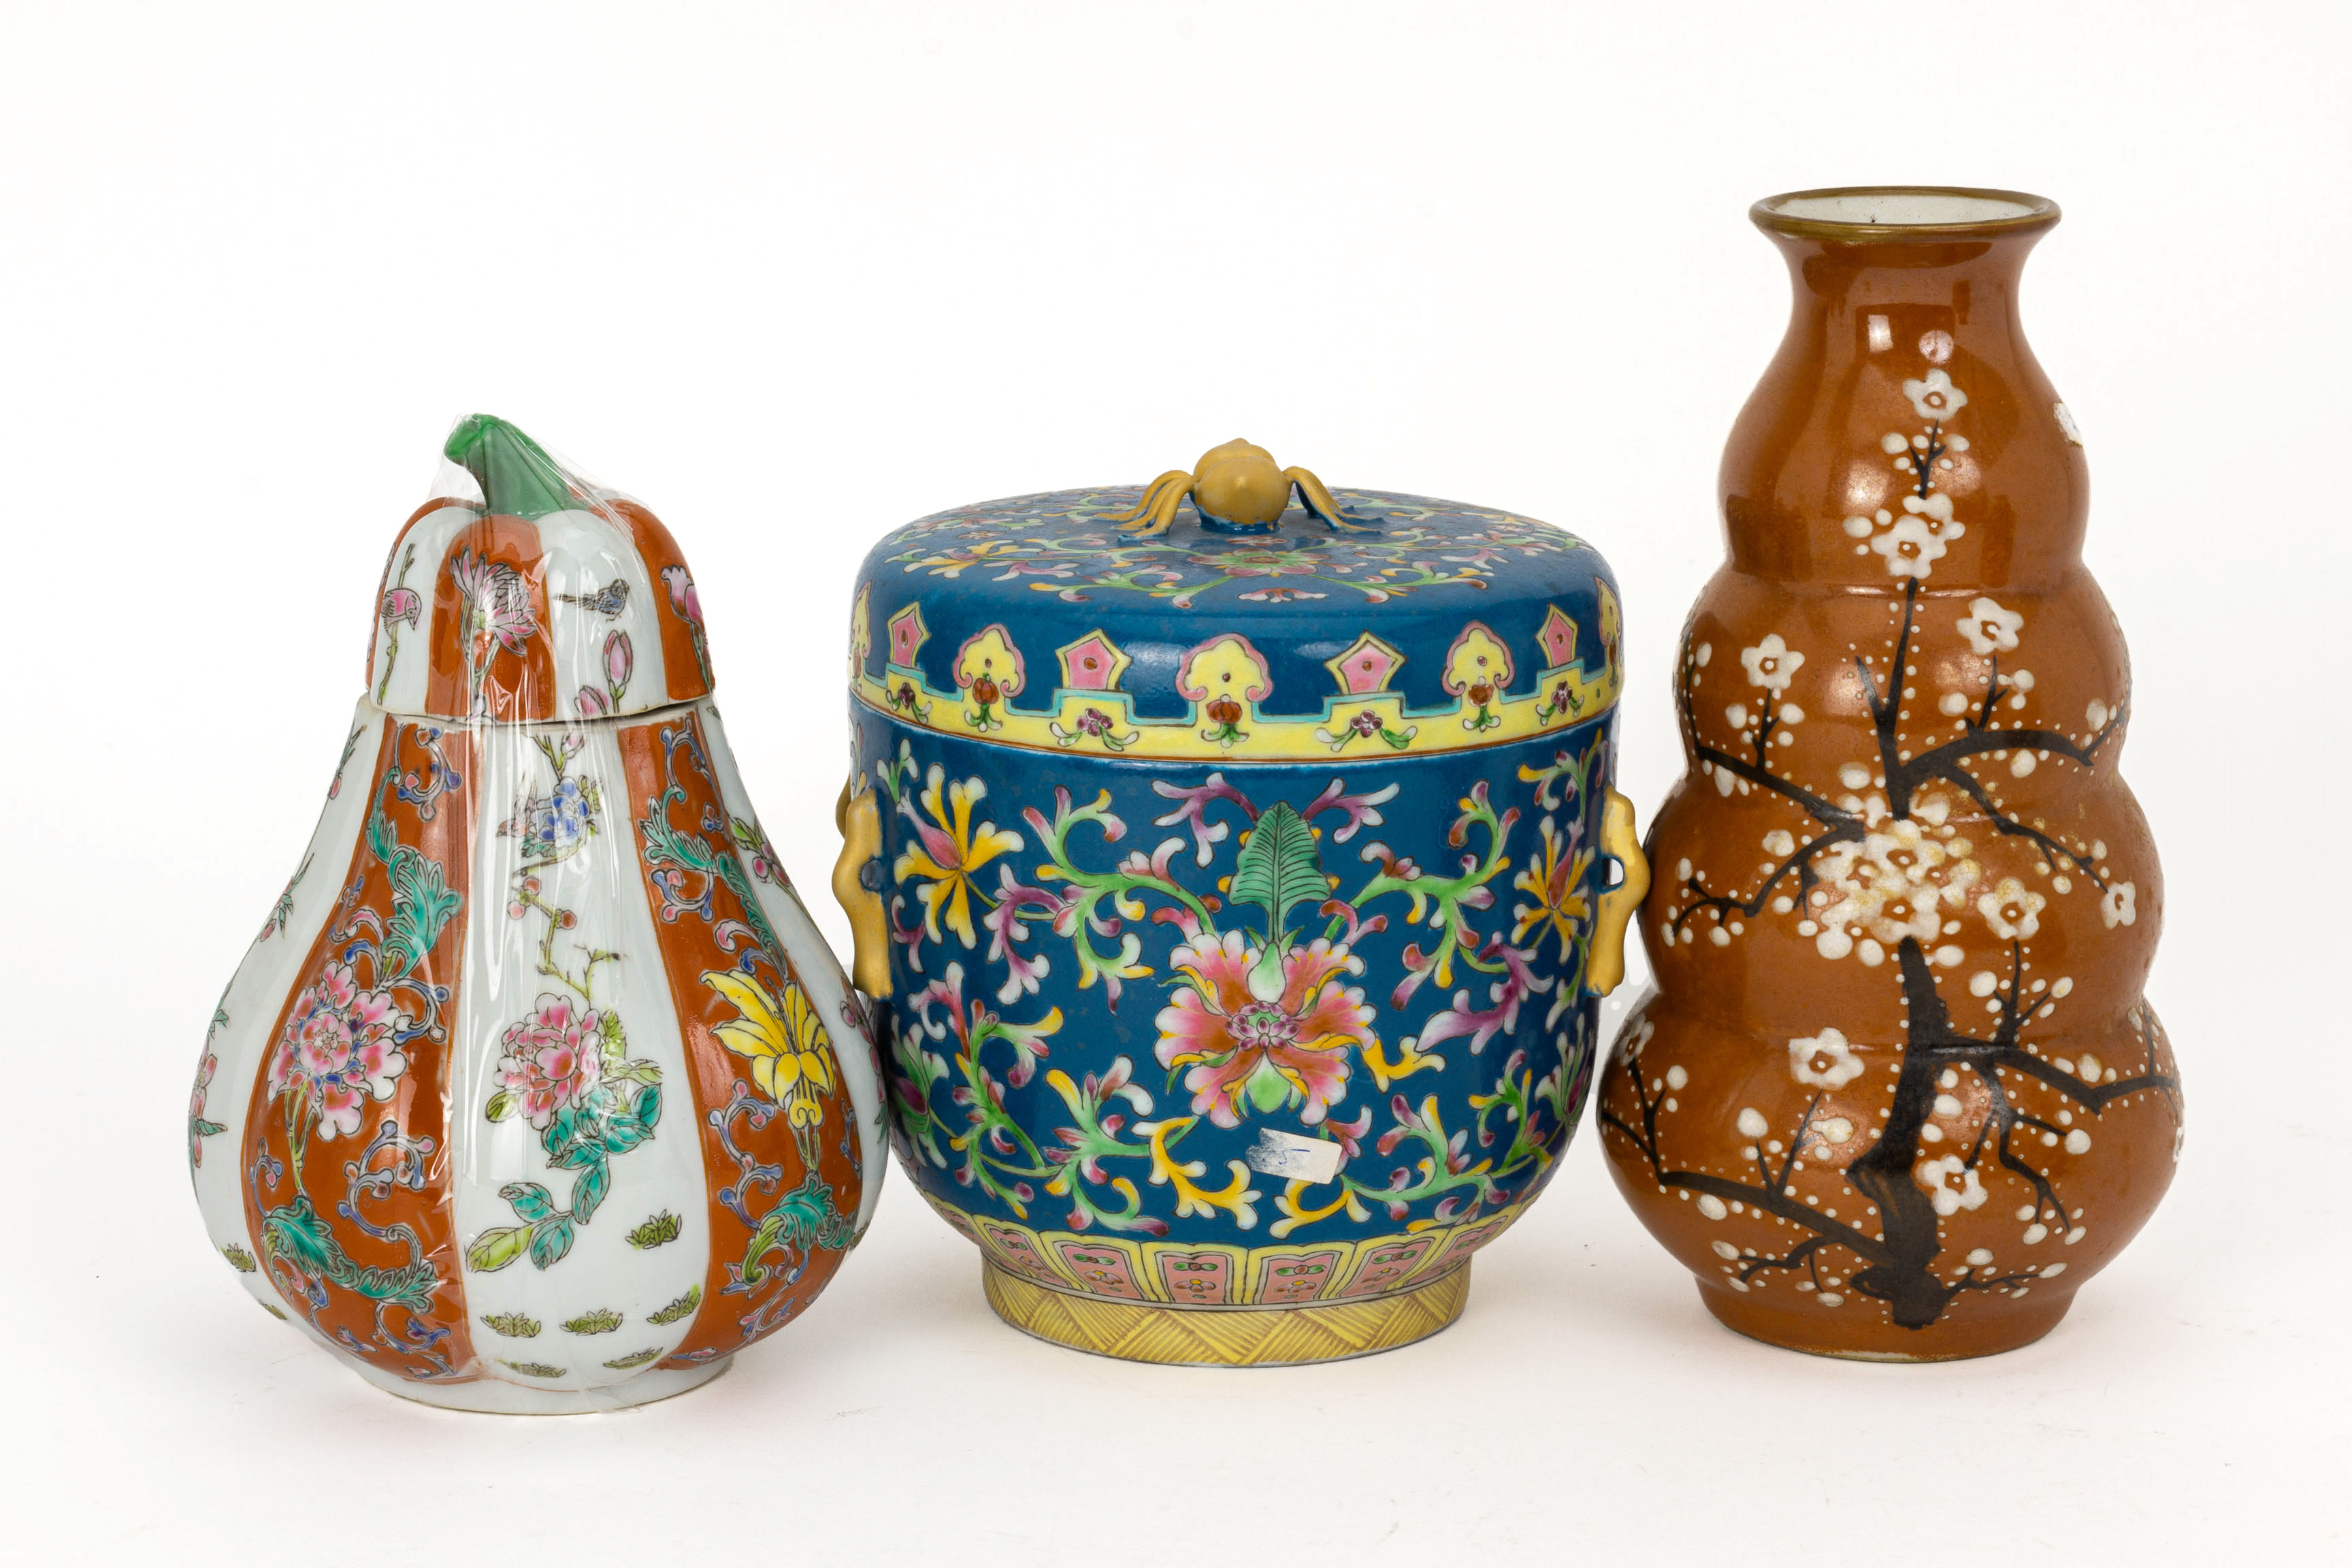 A GROUP OF SEVEN POLYCHROME DECORATED CERAMIC ITEMS - Image 2 of 3